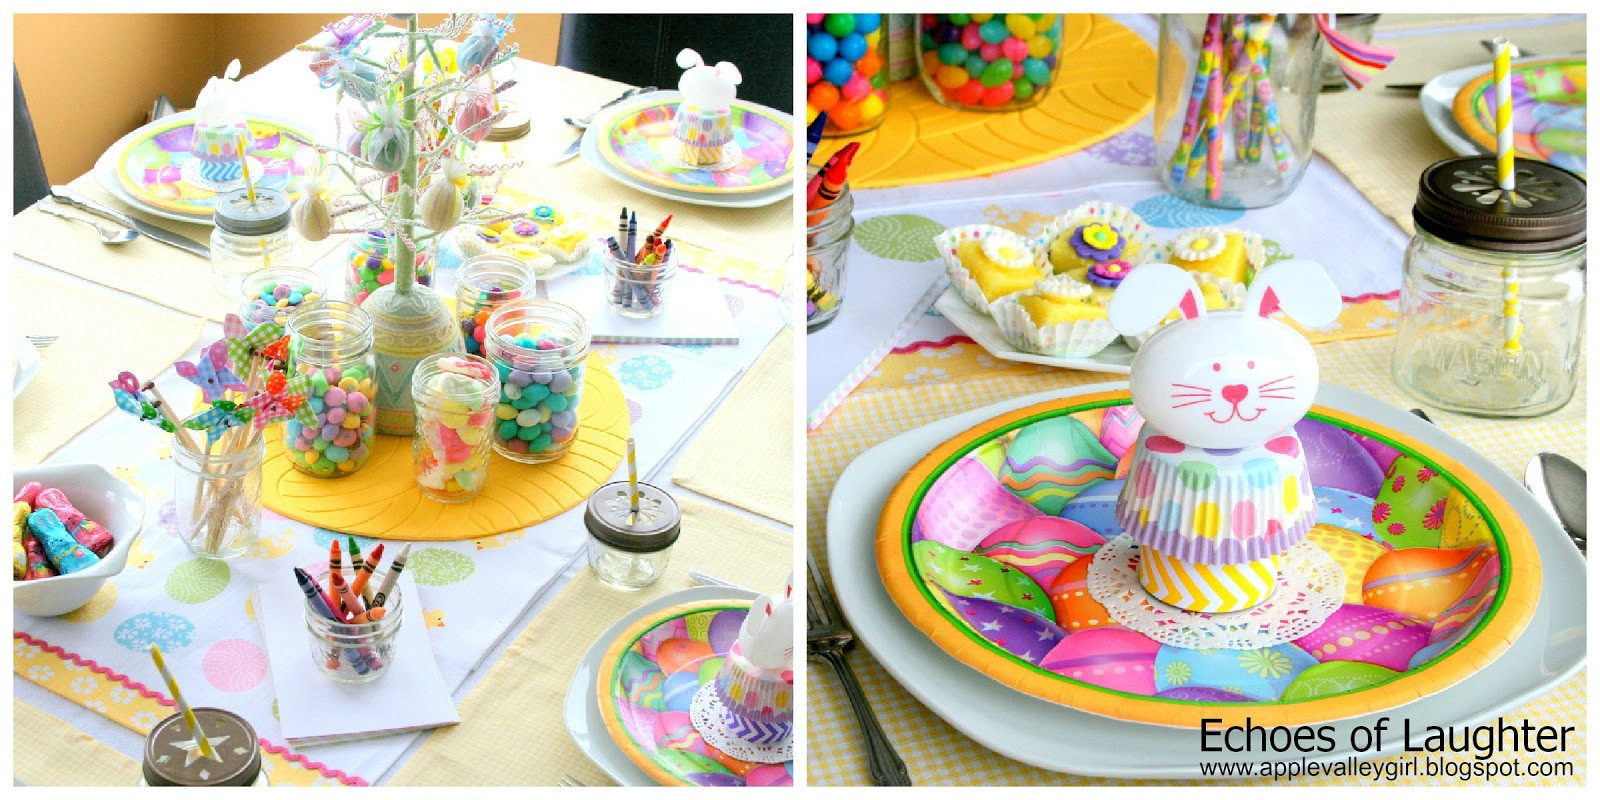 Toddler Easter Party Ideas
 An Easter Party For Kids Echoes of Laughter